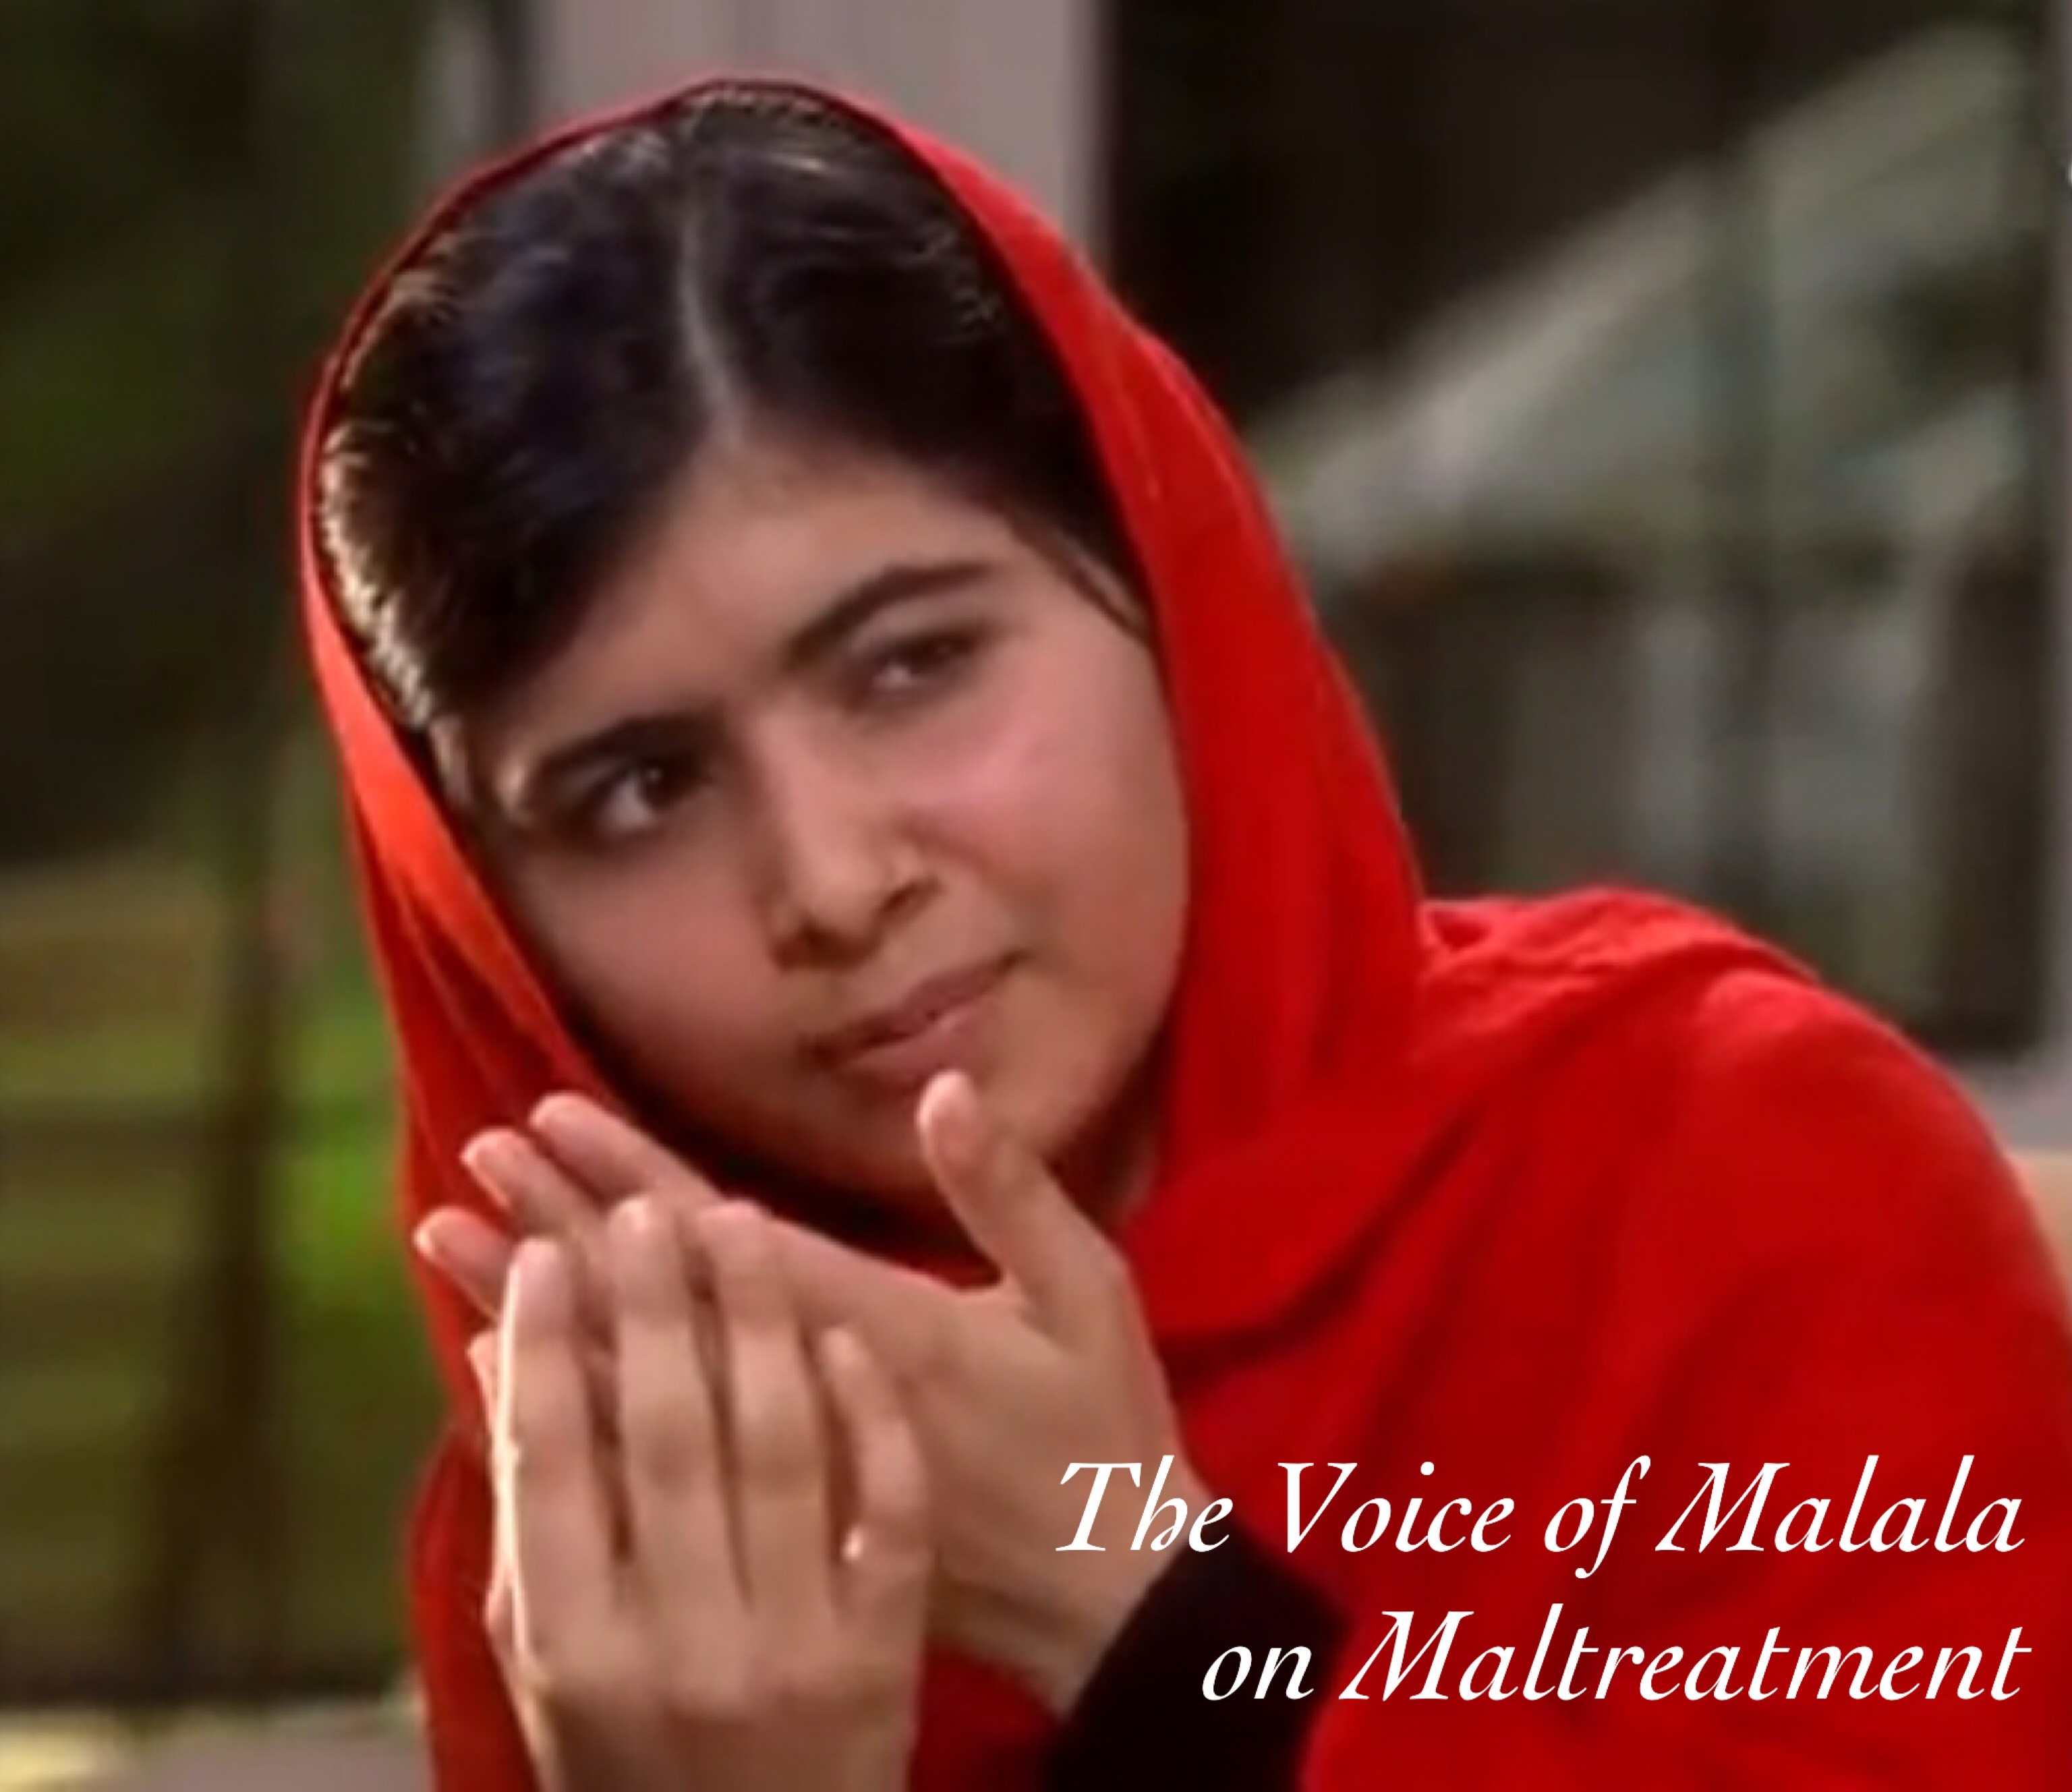 “The voice of Malala on maltreatment…a series on Justin Bieber, Britney Spears and Wakim (PBB 8) Have It?”- Webseries 6